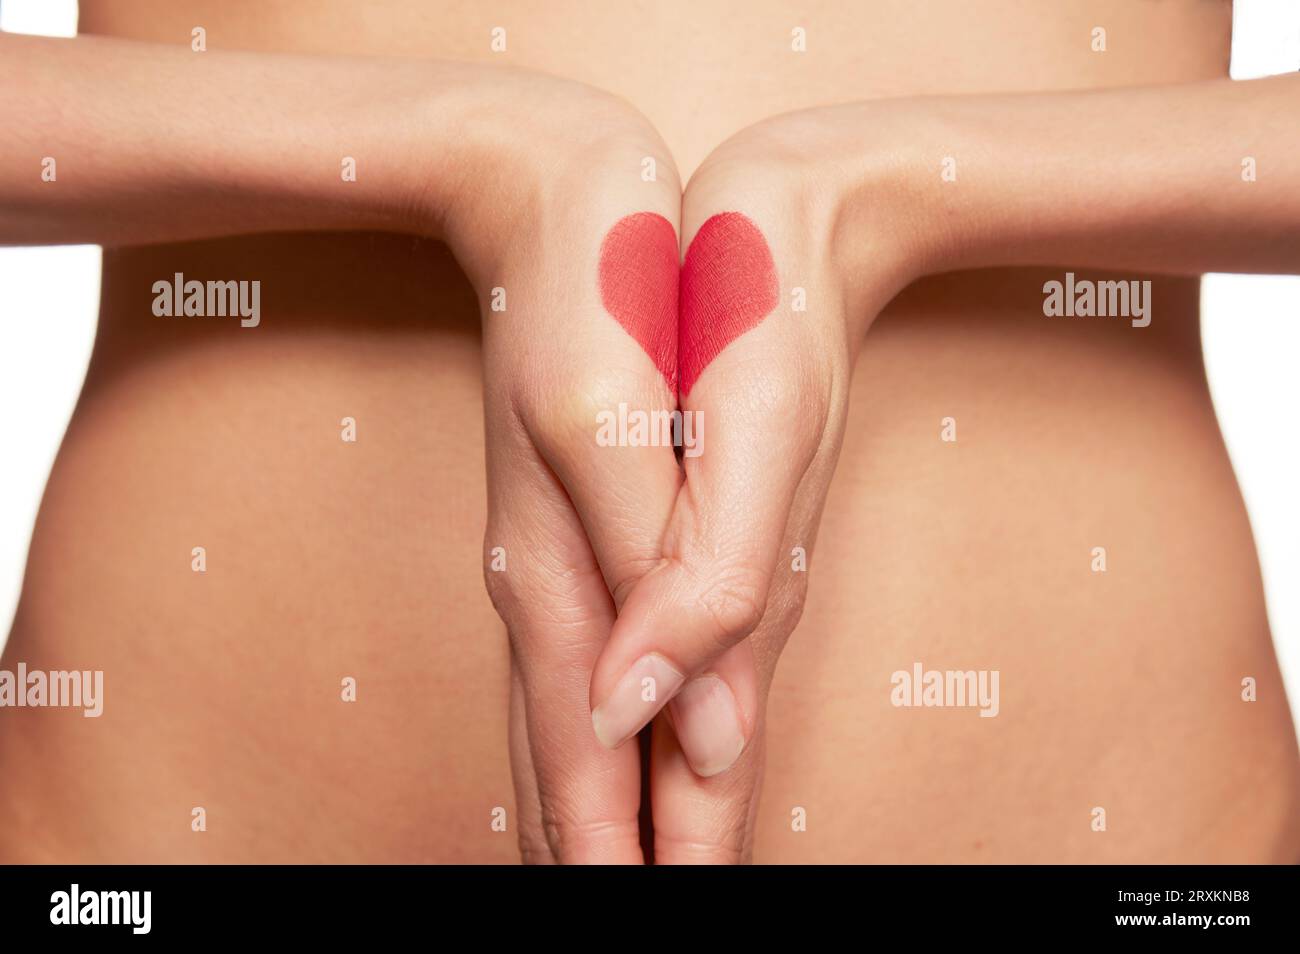 Body paint heart drawn on clasped hands Stock Photo